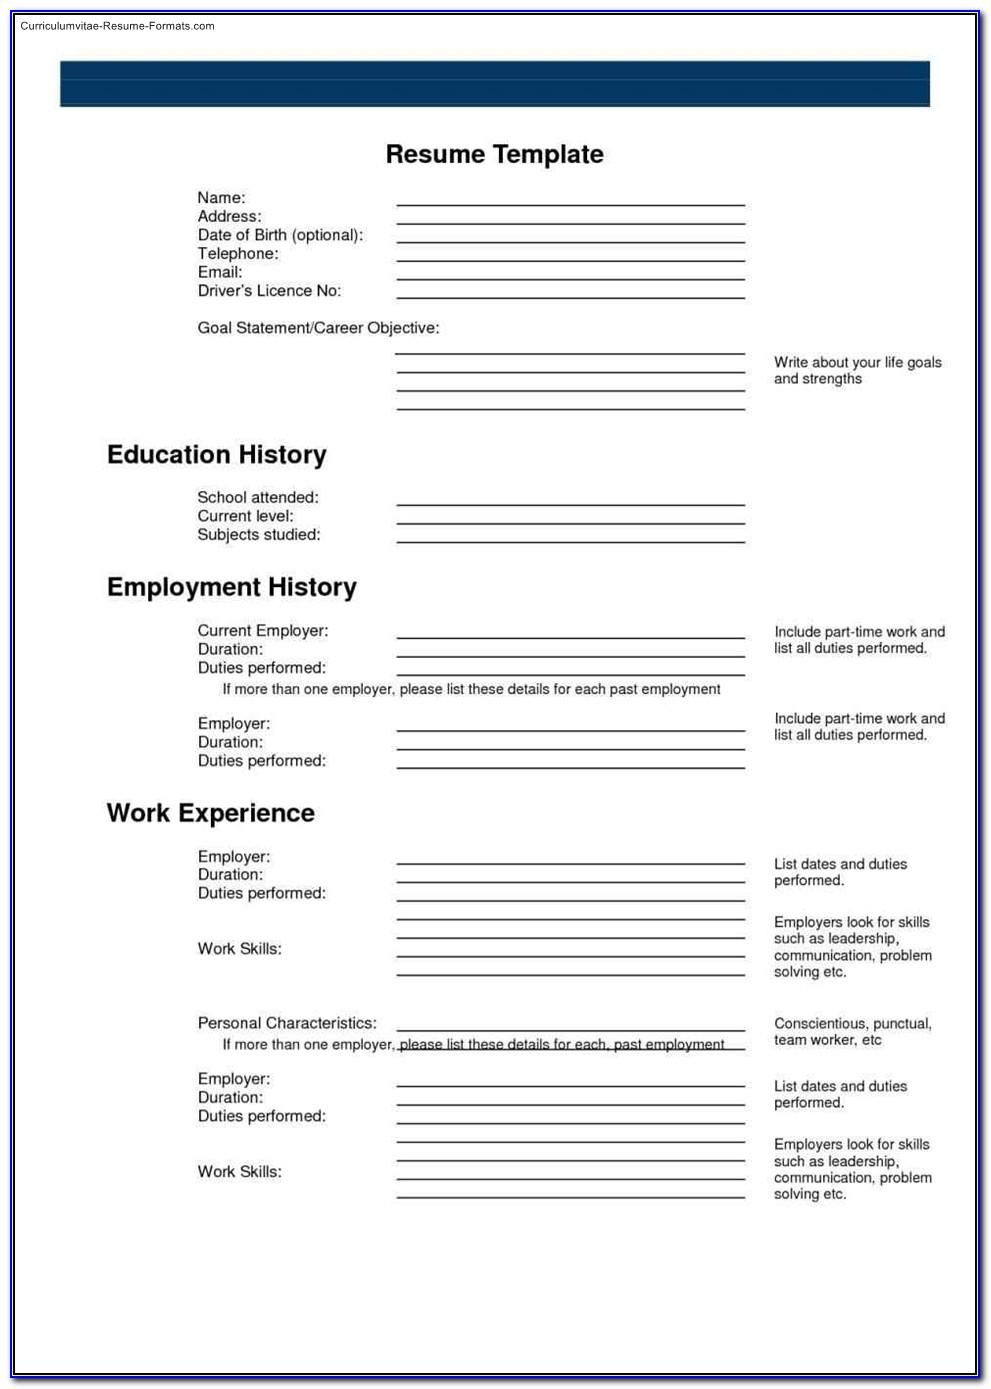 Fillable Resume Templates